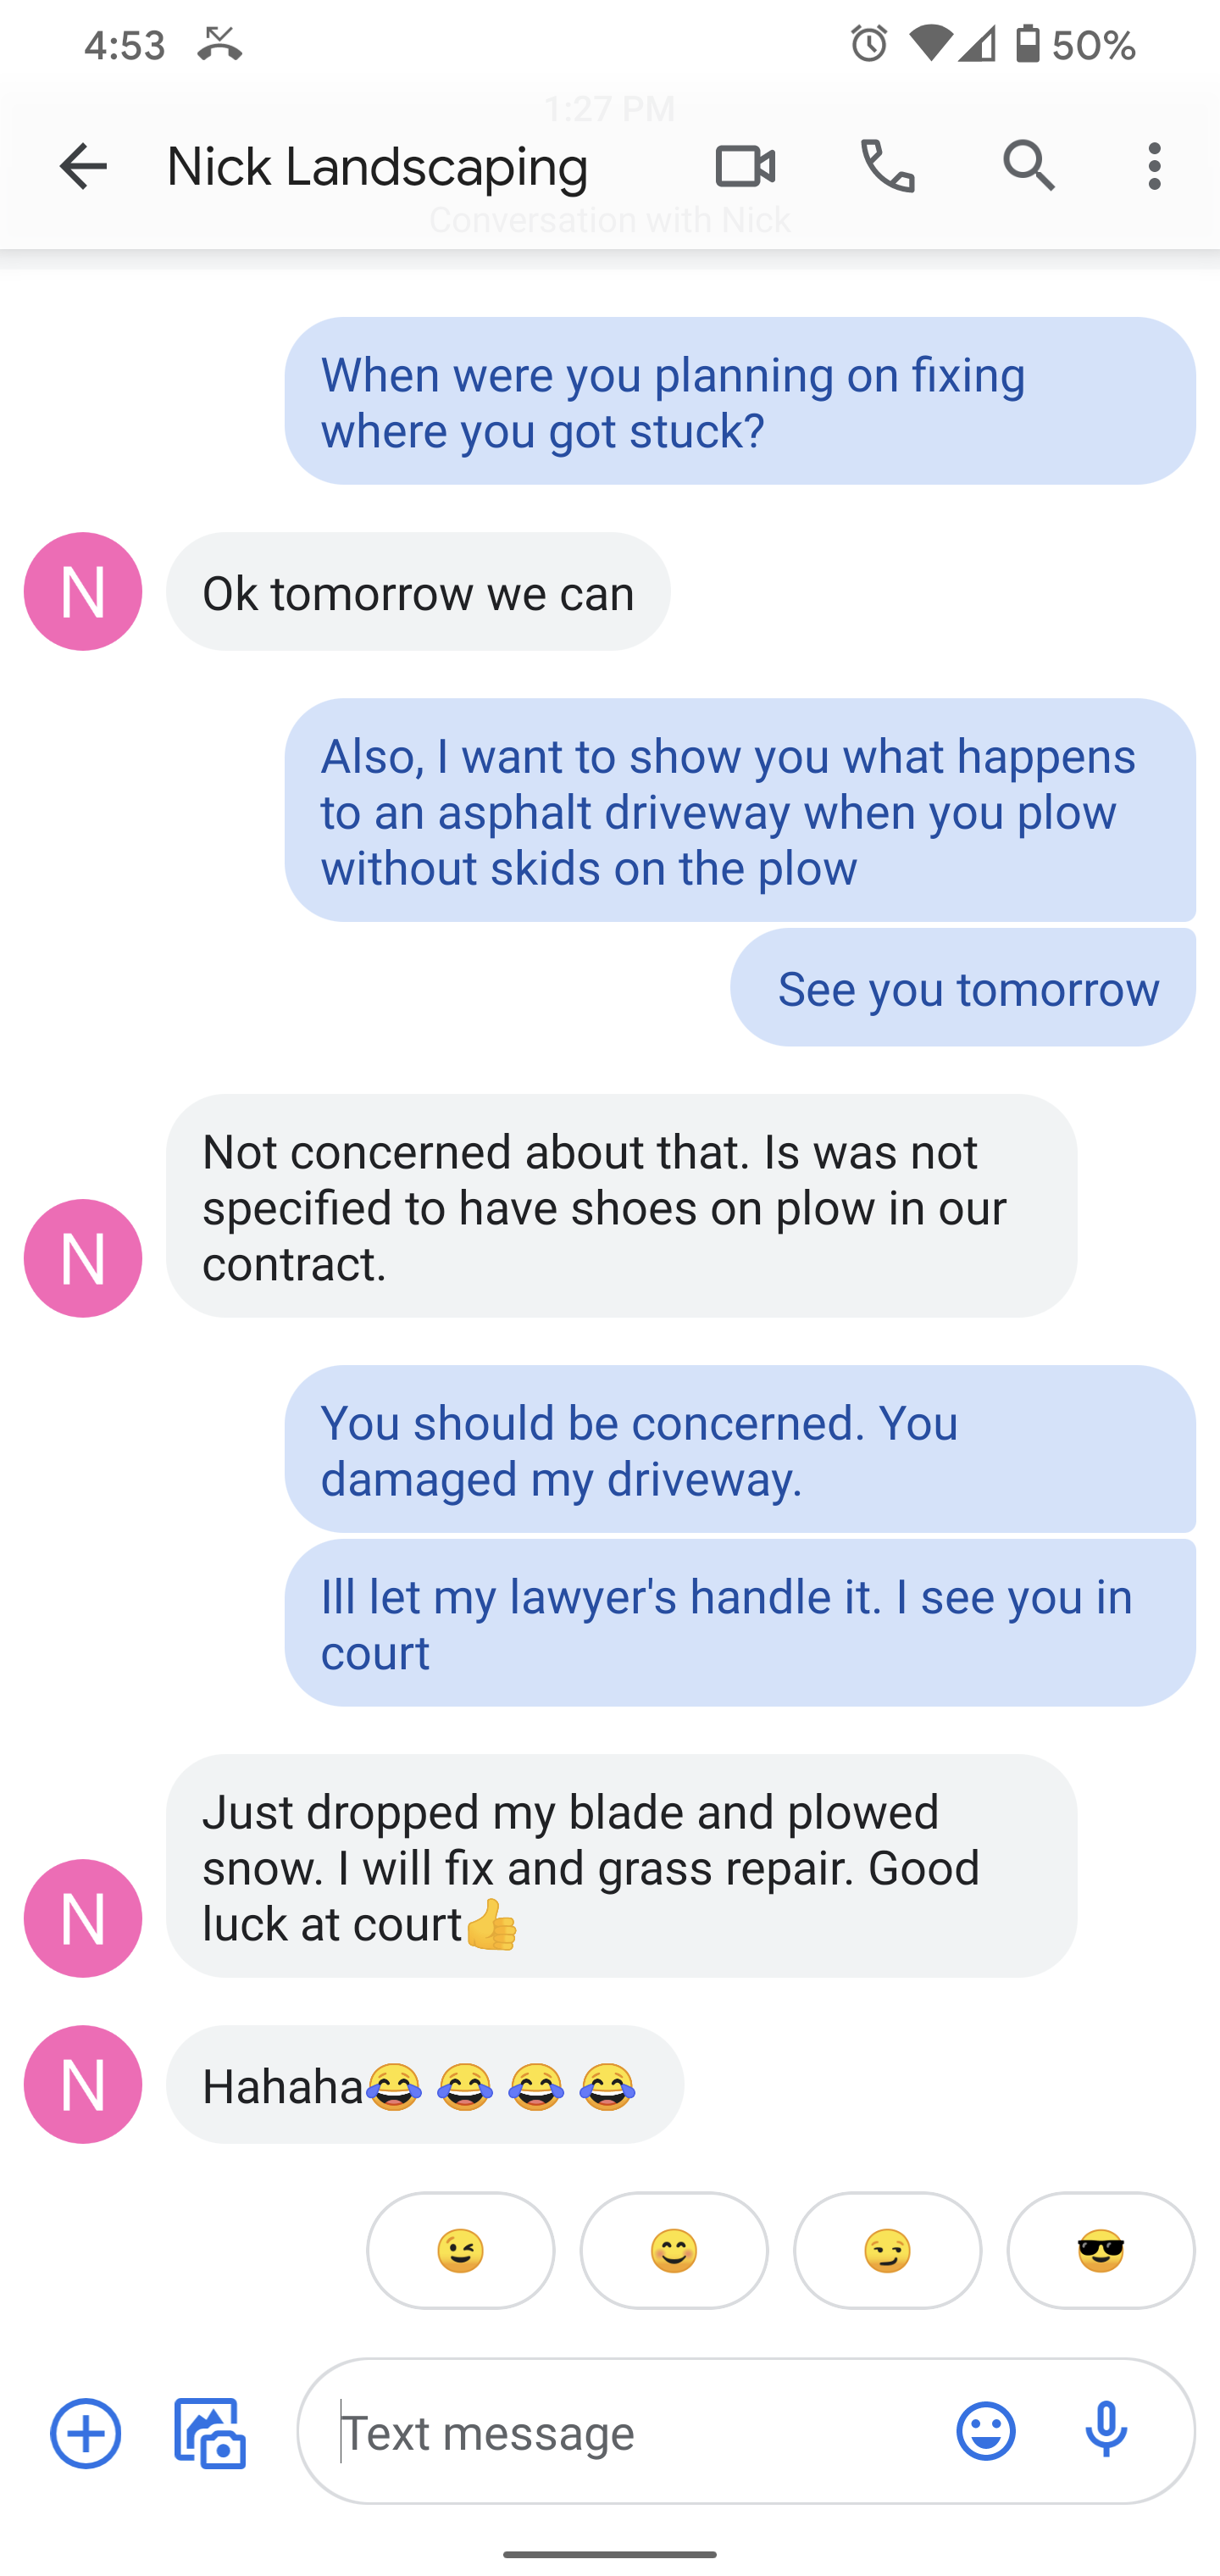 Nick's response to damages he caused